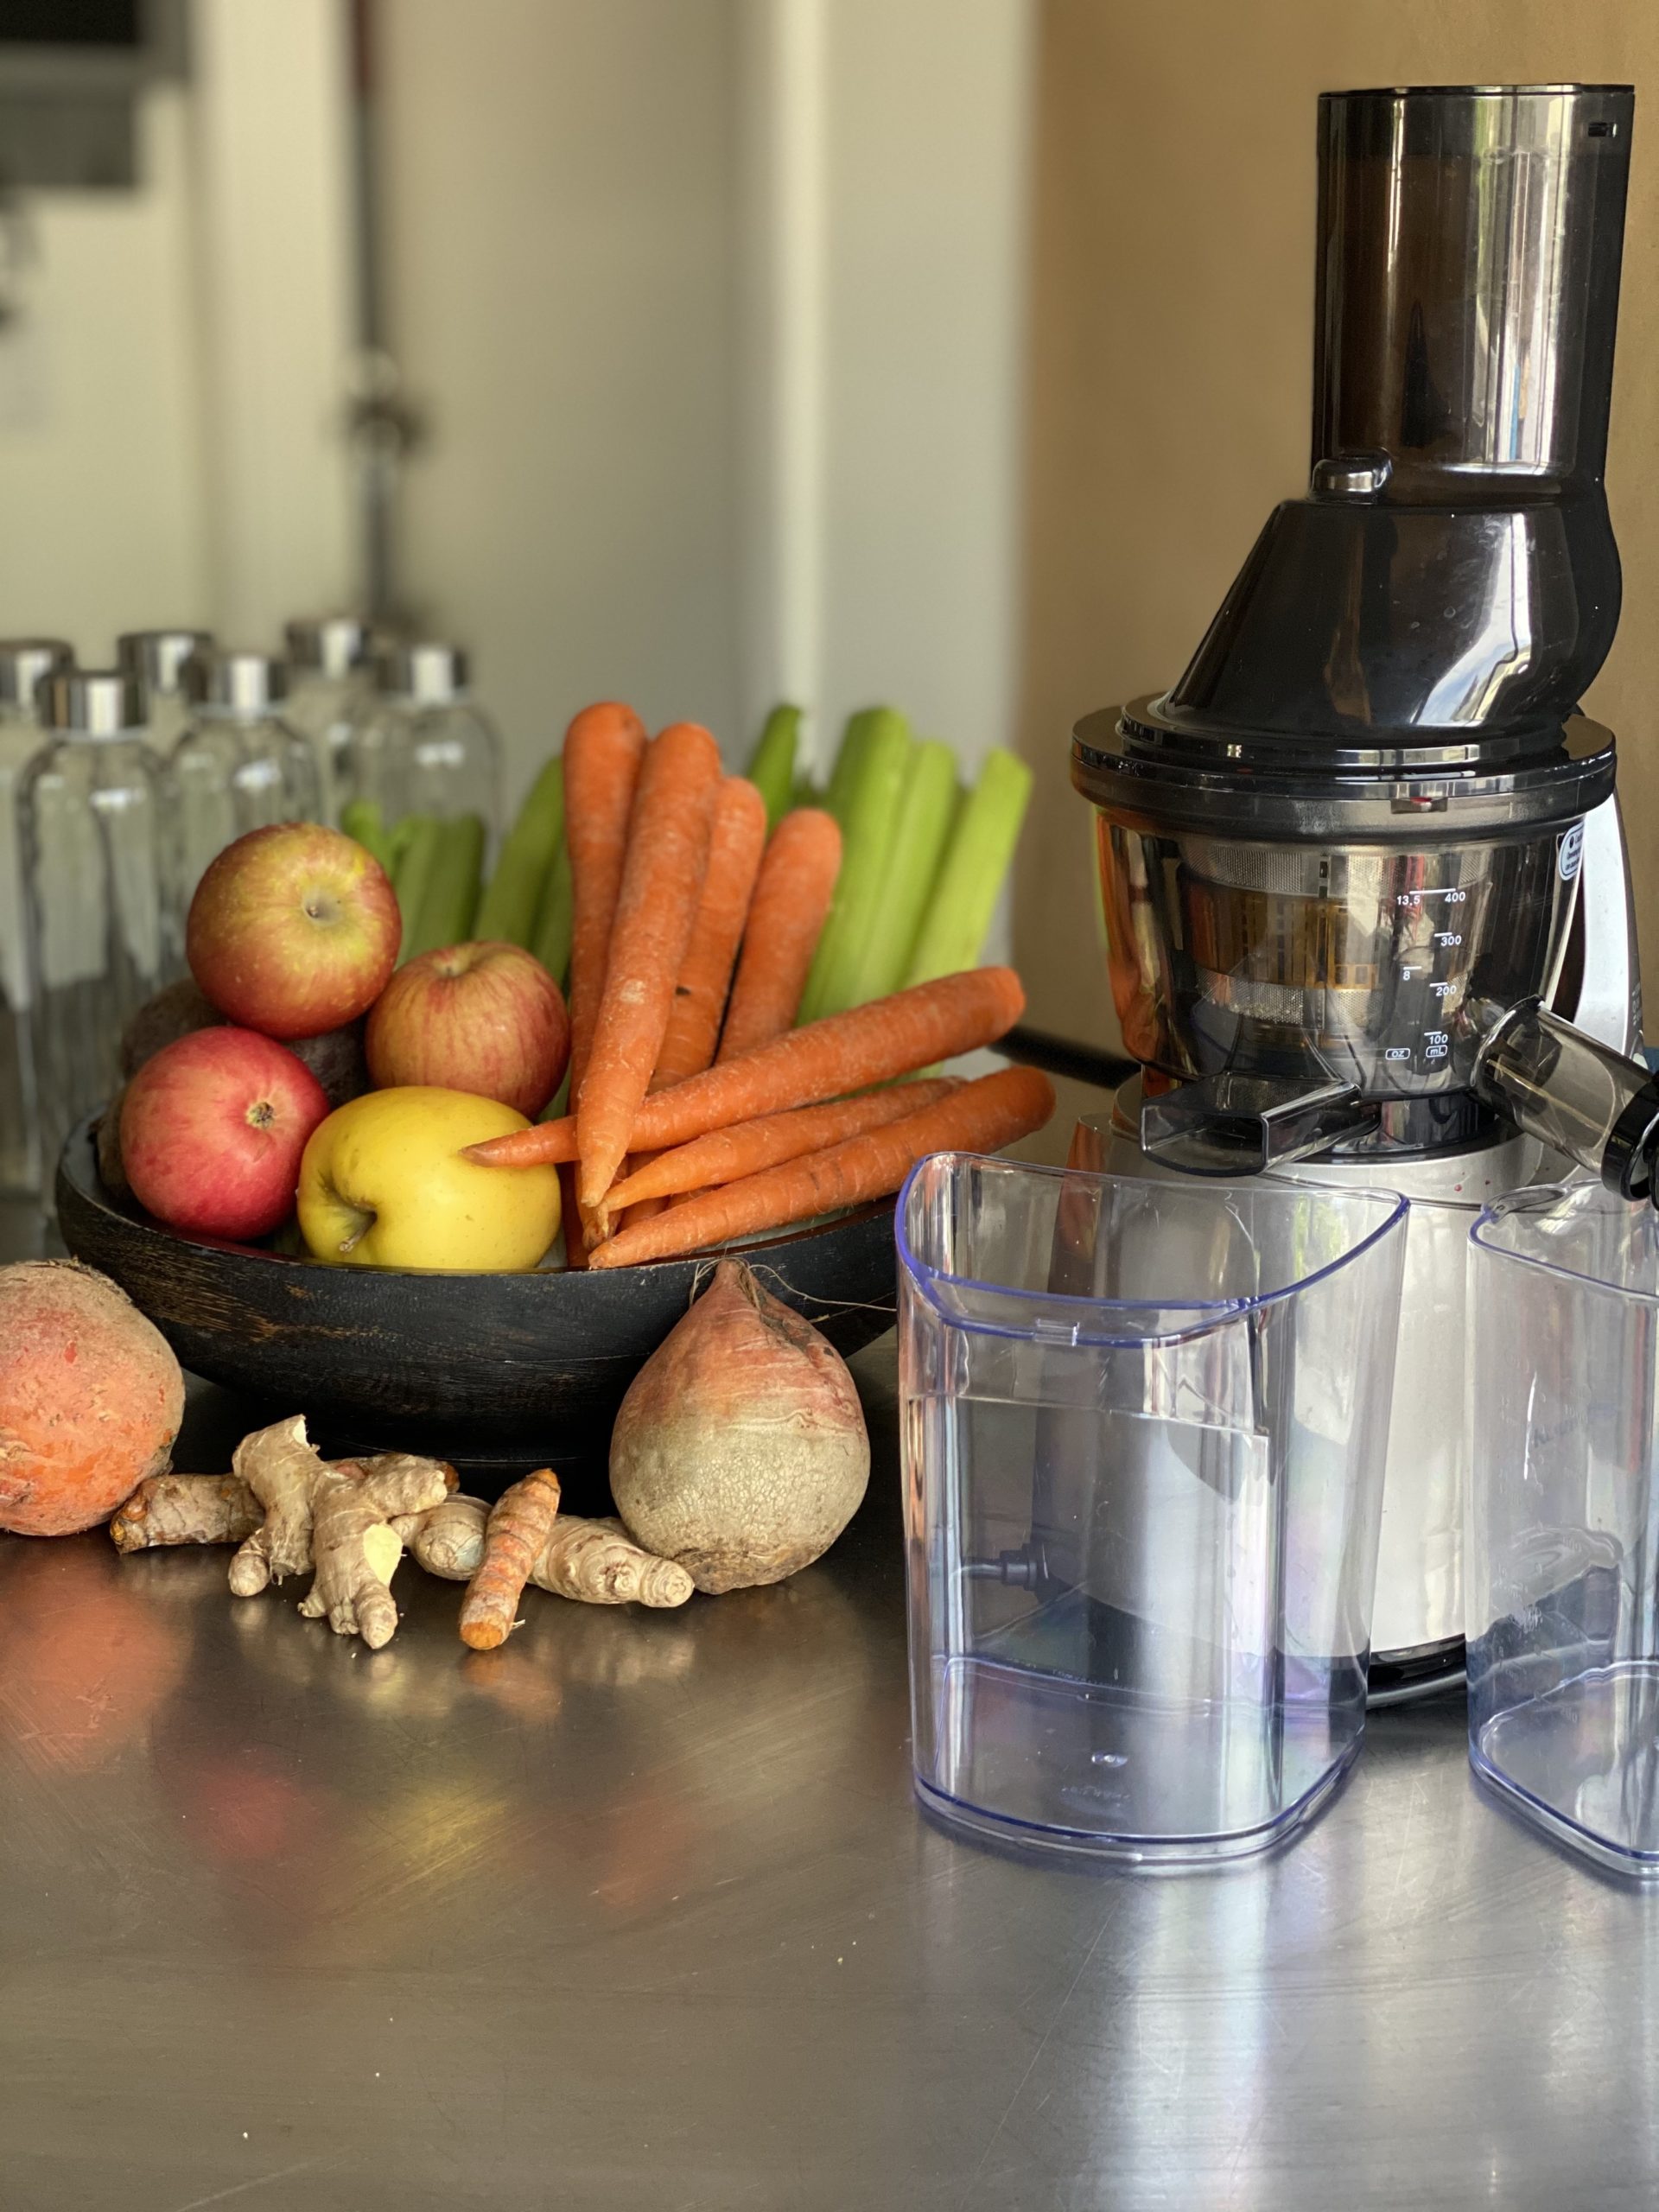 how to start juicing